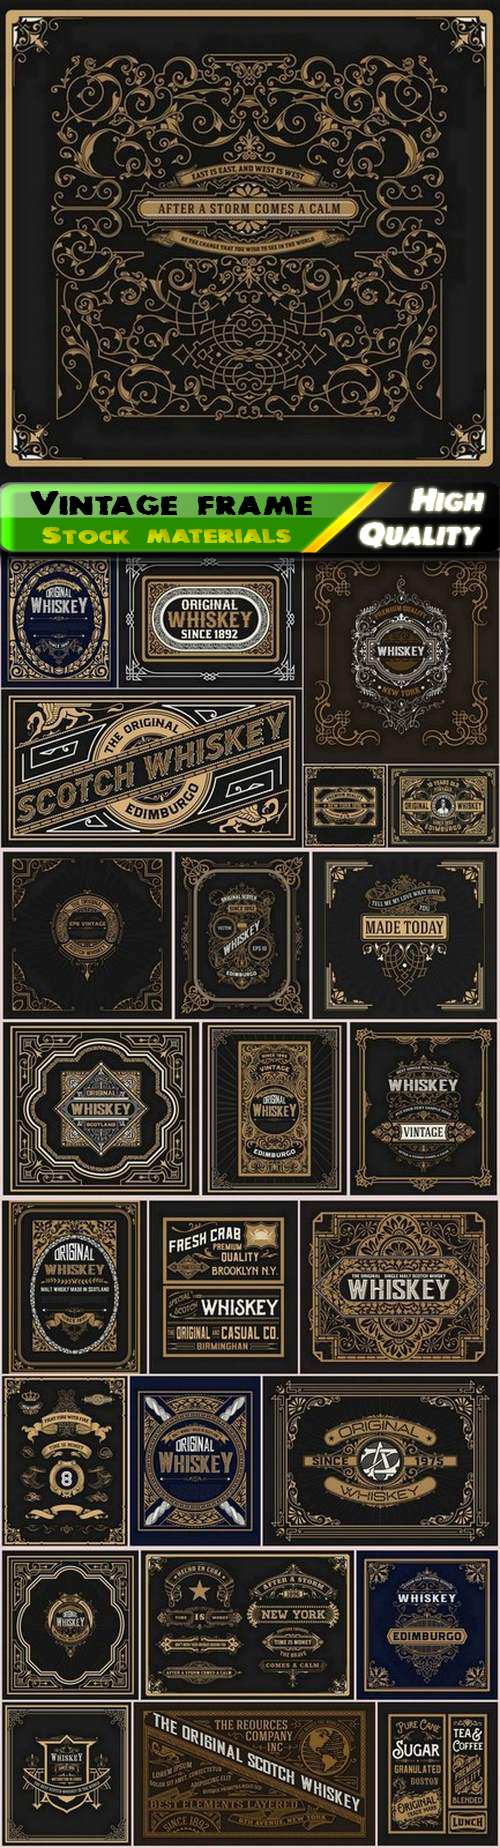 Vintage frame for menu and old whiskey label in hipster style - 25 Eps